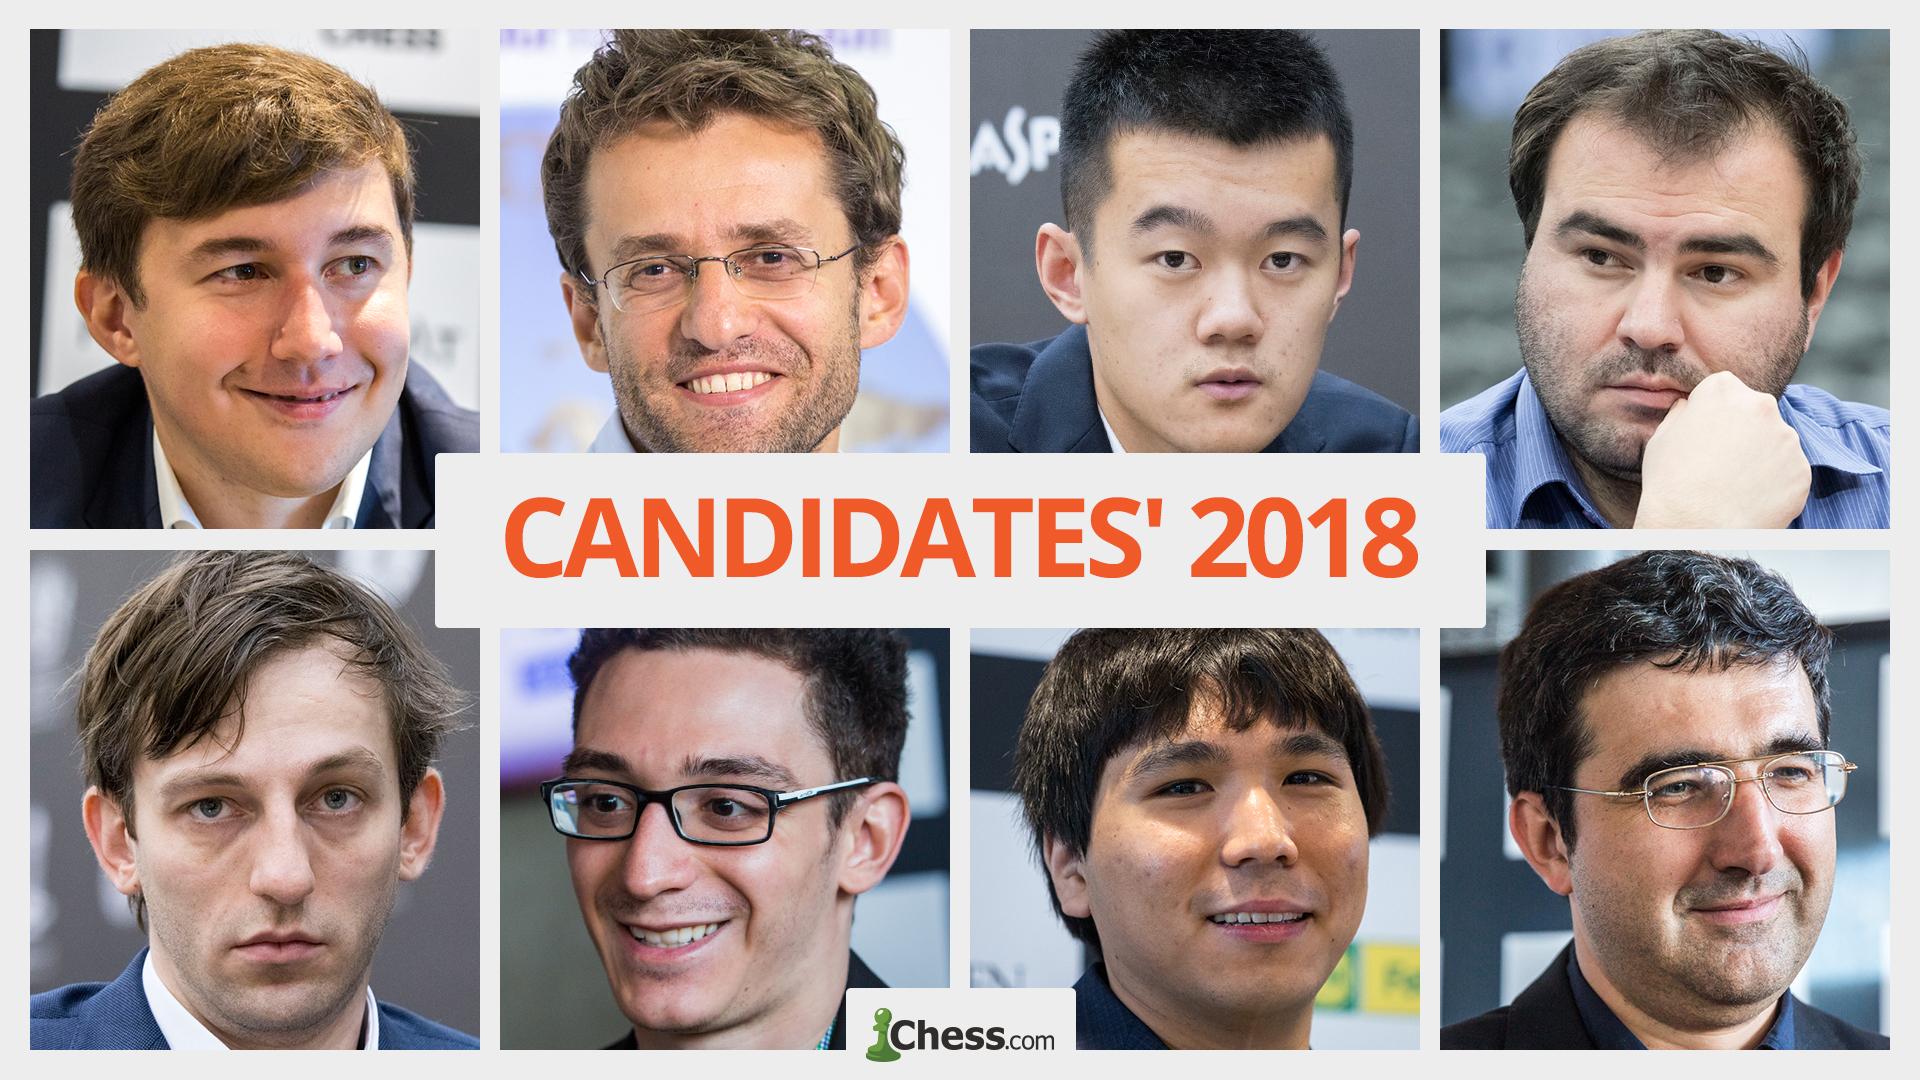 Giri, Carlsen Face Off On Twitter As FIDE Candidates' Tournament Starts 